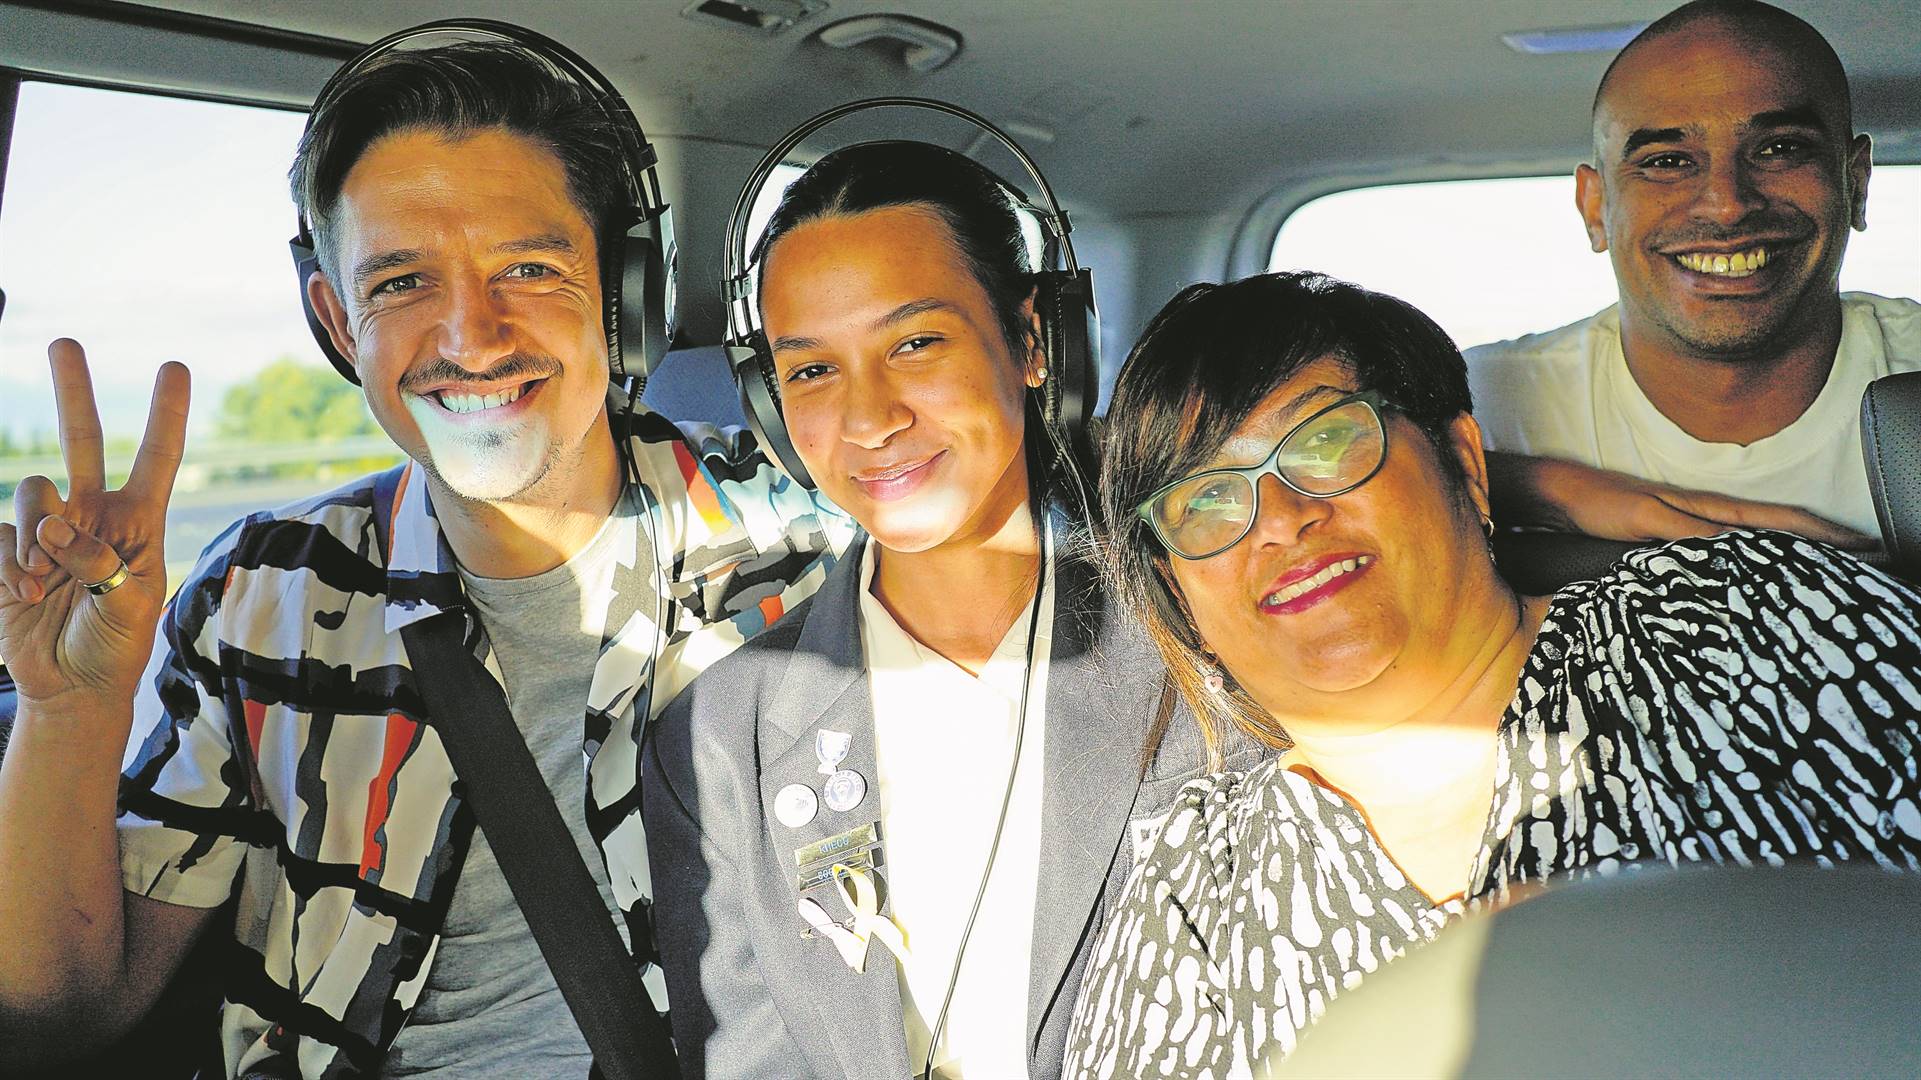 Amy February and her mom in the taxi with Danilo Acquisto (left) and Carl Lewis of Good Hope FM.